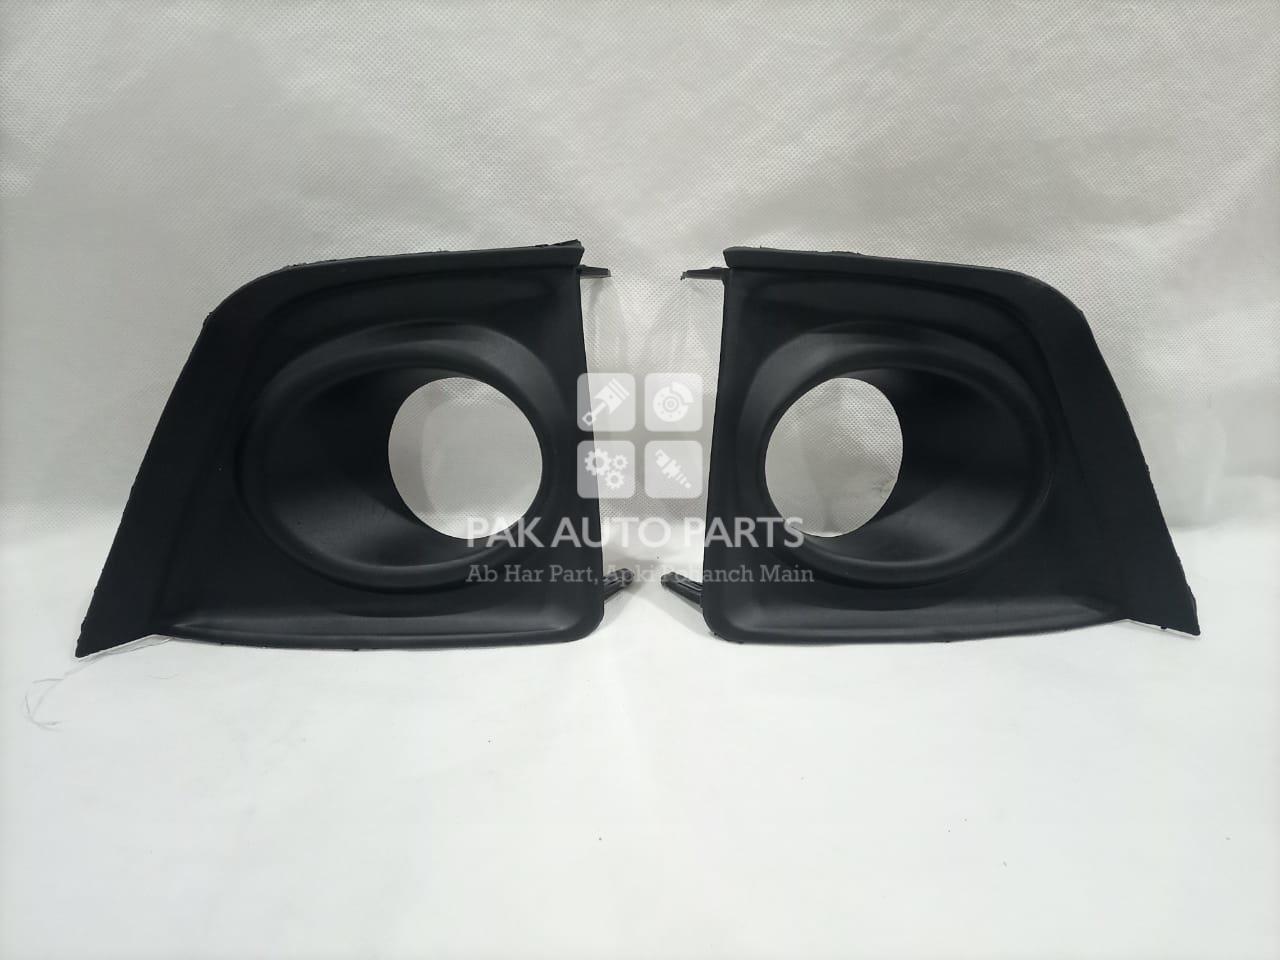 Picture of Toyota Corolla 2015-18 Fog Light Cover Set